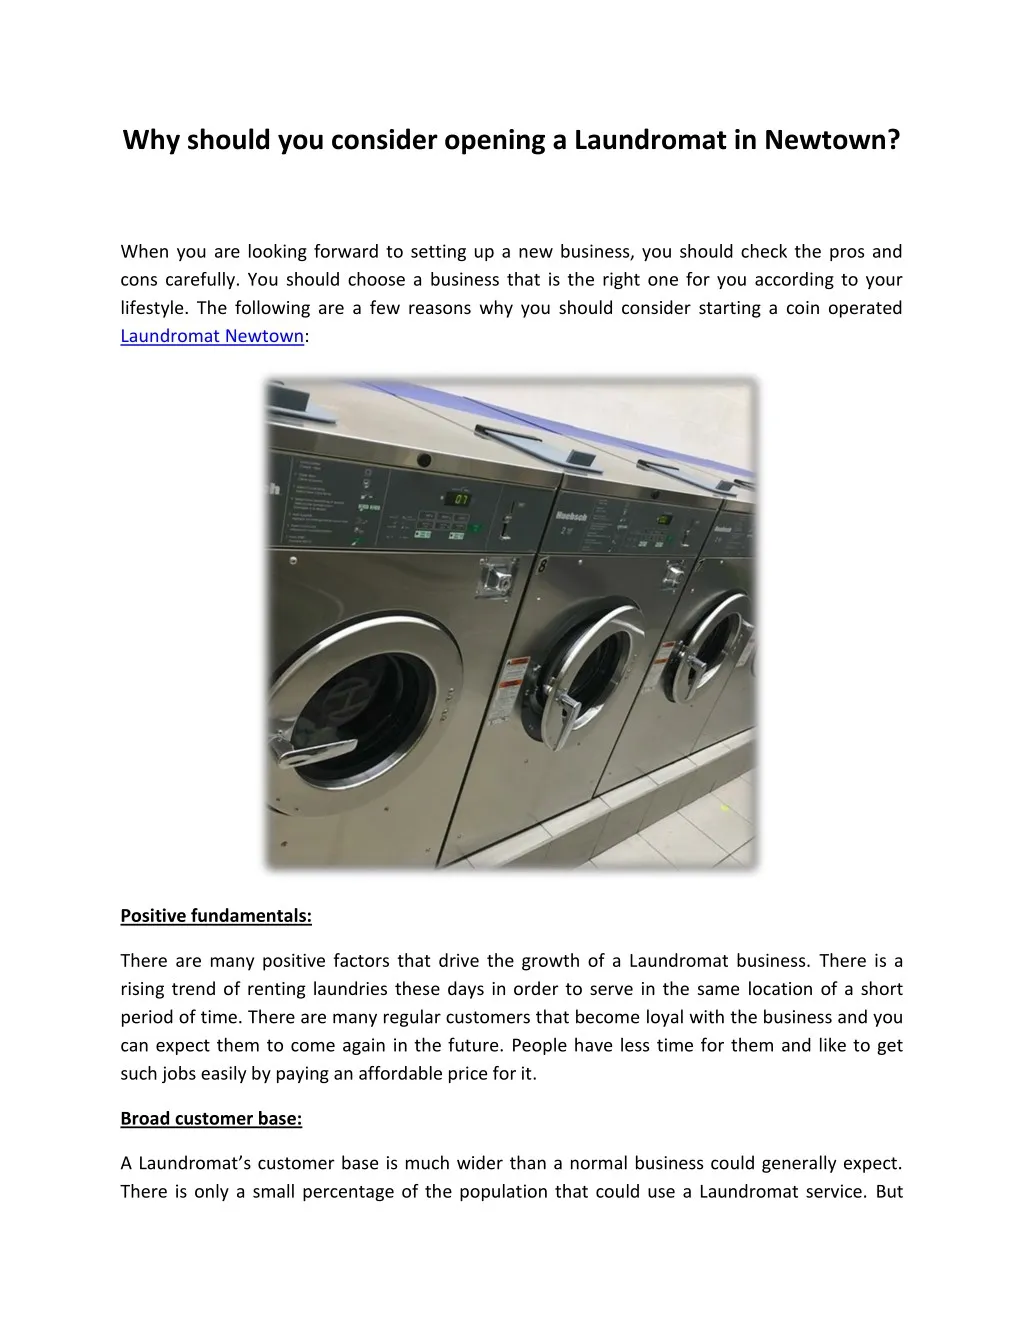 why should you consider opening a laundromat